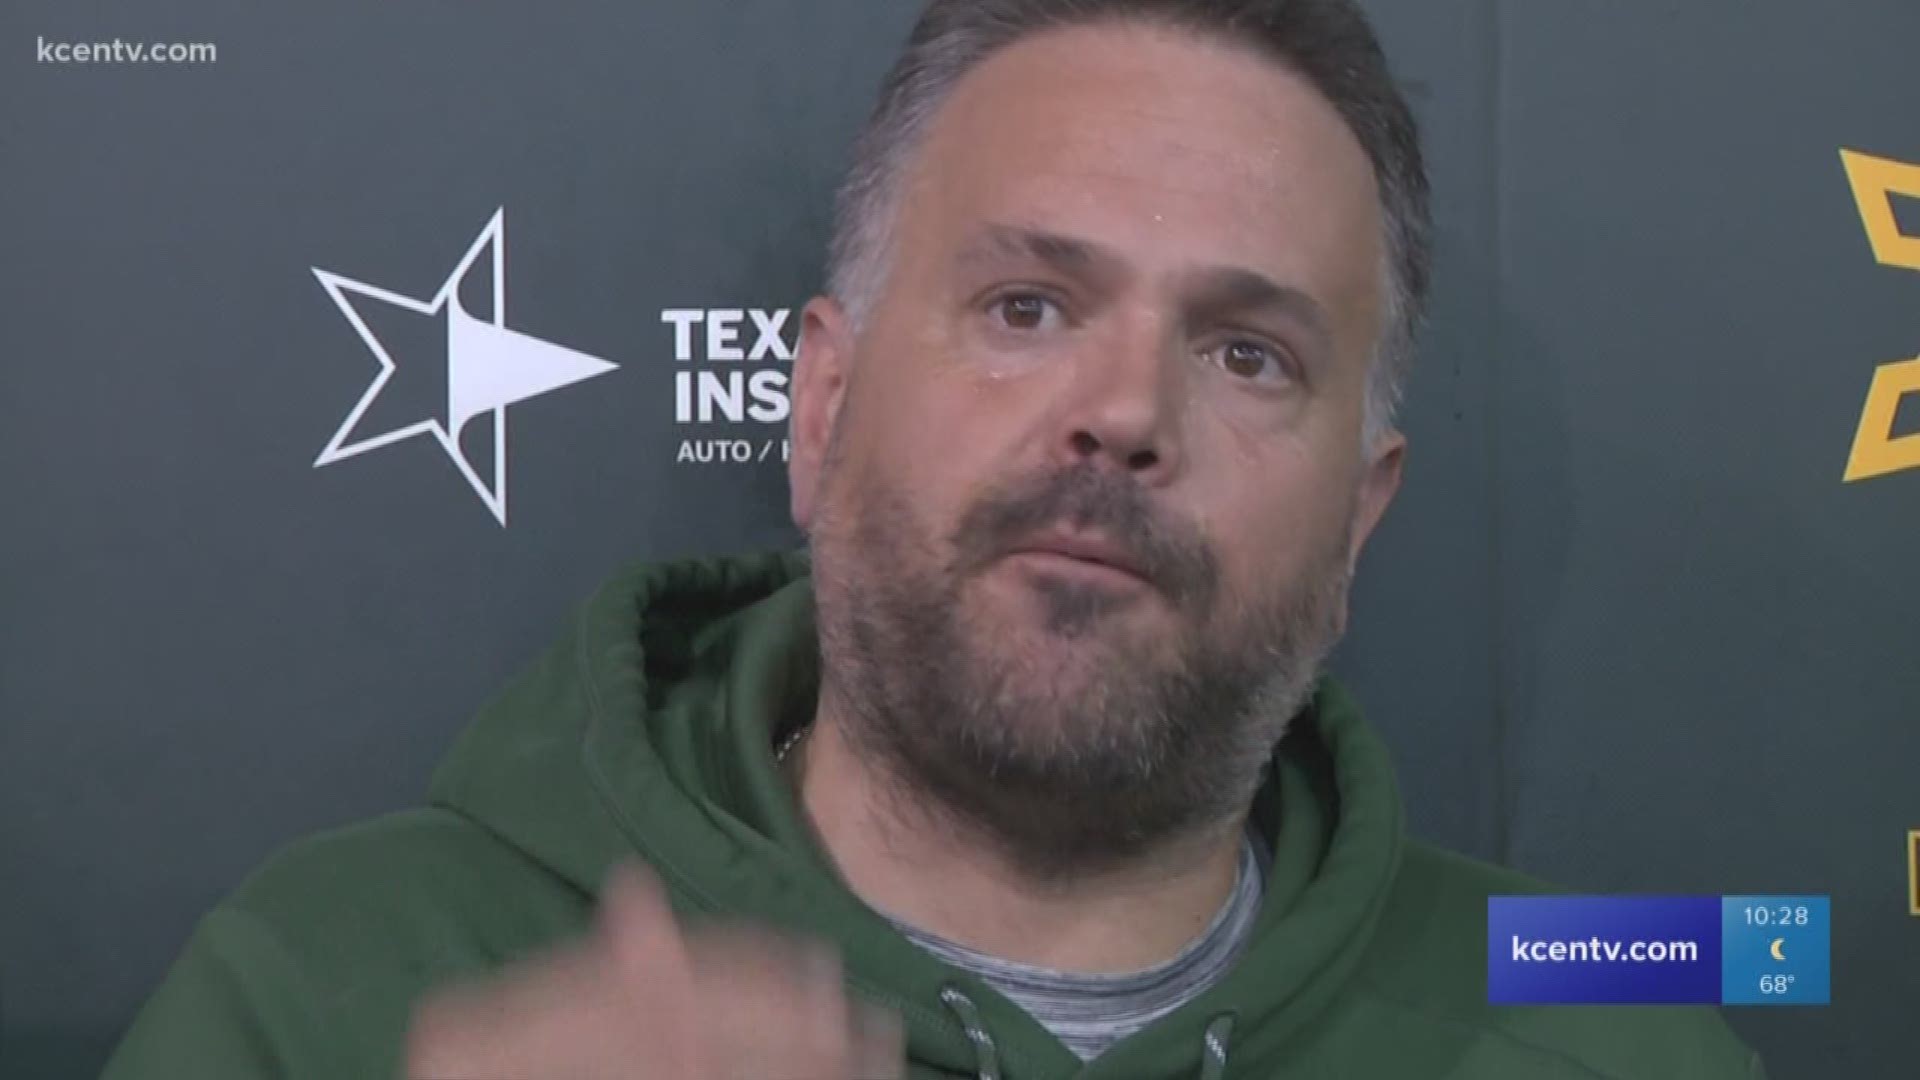 Coach Matt Rhule said to get his squad to get to the next level, they need to raise their expectations.